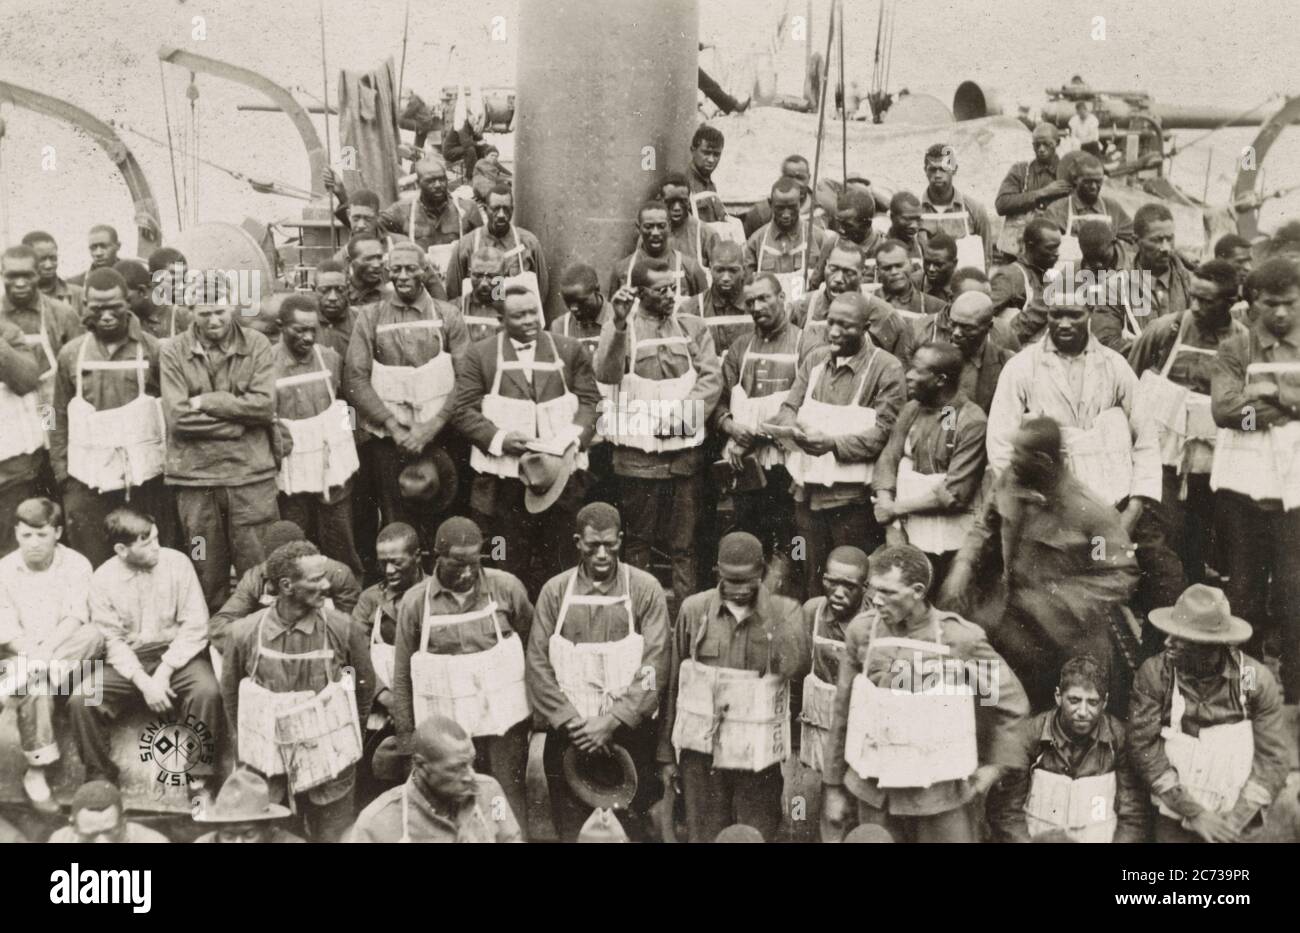 On board the 'Momus' at sea, in the danger zone Part of the civilian stevedore battalion, under command of captain Goege Luberoff, Q.M.C., on board the Momus in the danger zone, on their way to Saint Nazaire, France. June 1917 Stock Photo